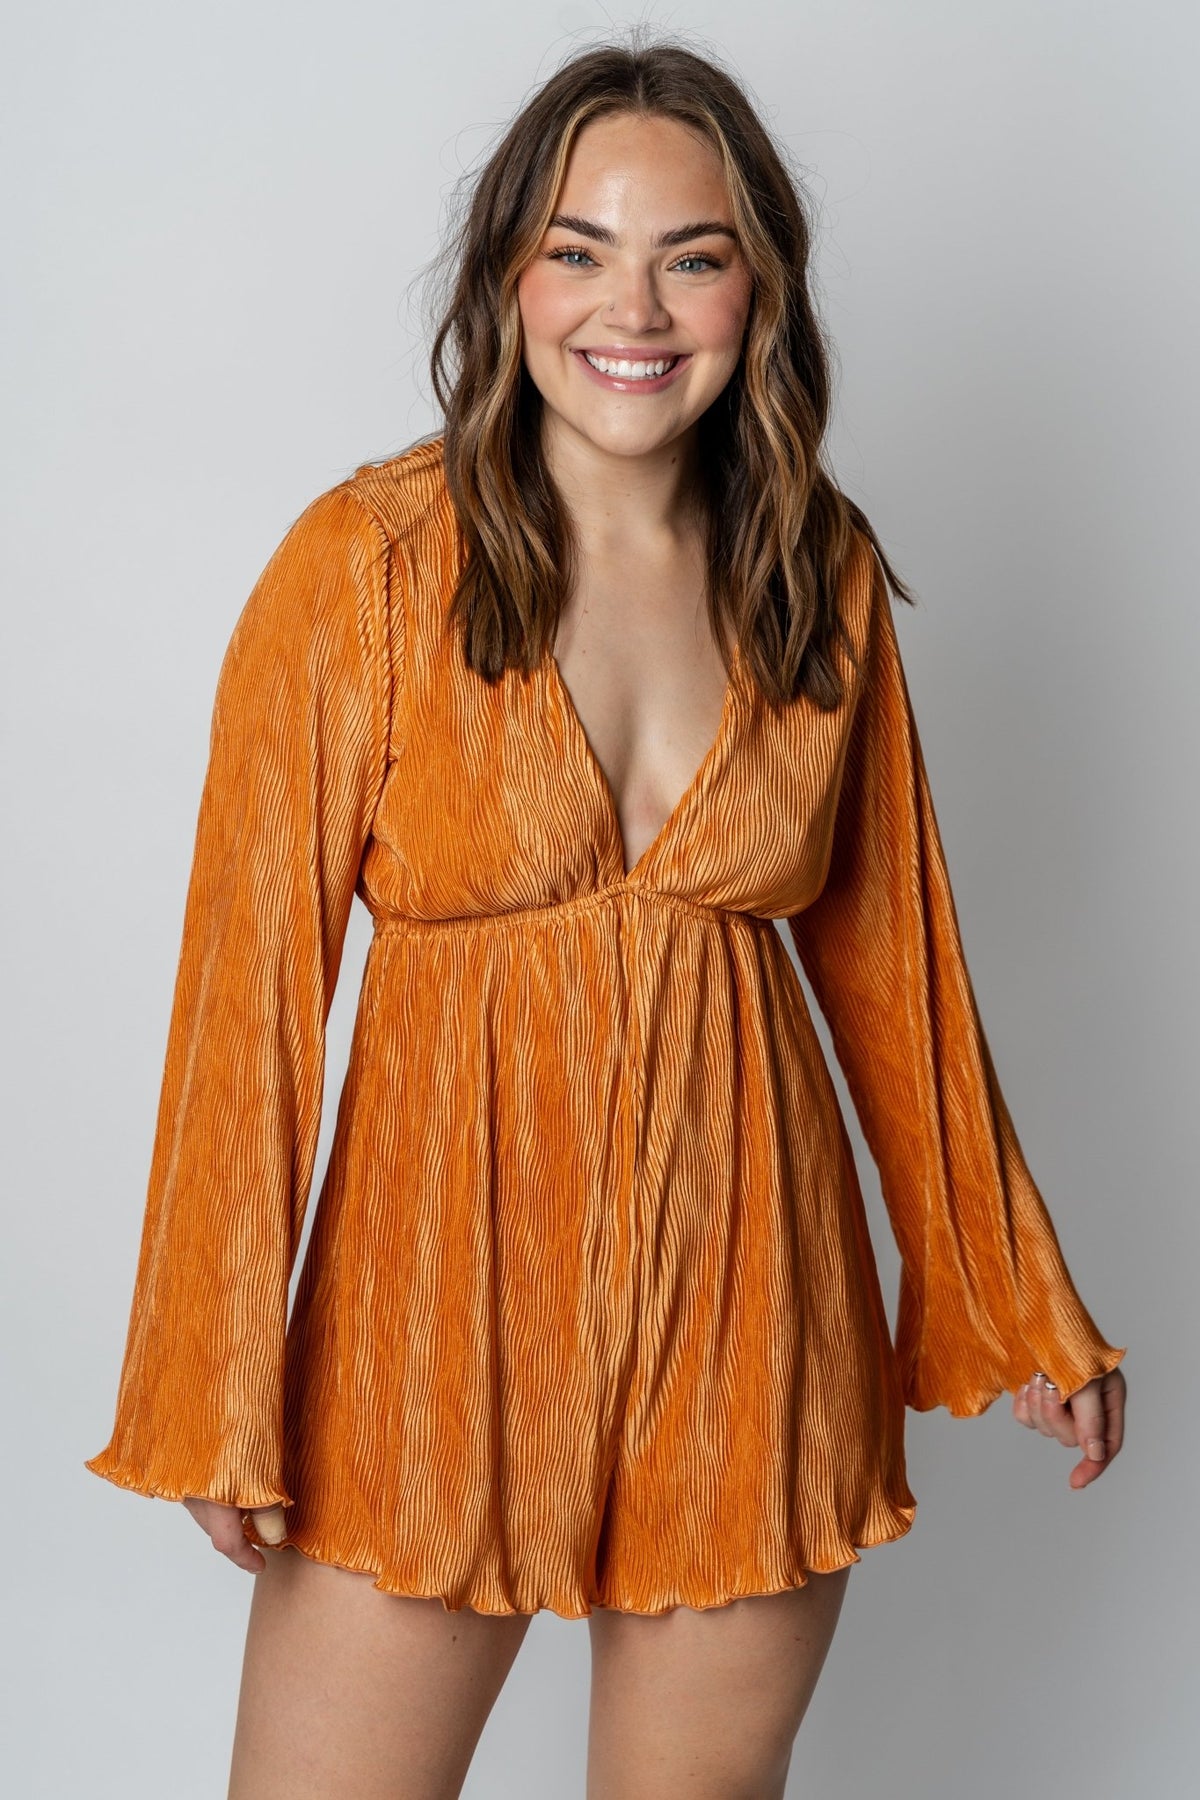 Bell sleeve pleated romper orange - Cute Romper - Trendy Rompers and Pantsuits at Lush Fashion Lounge Boutique in Oklahoma City